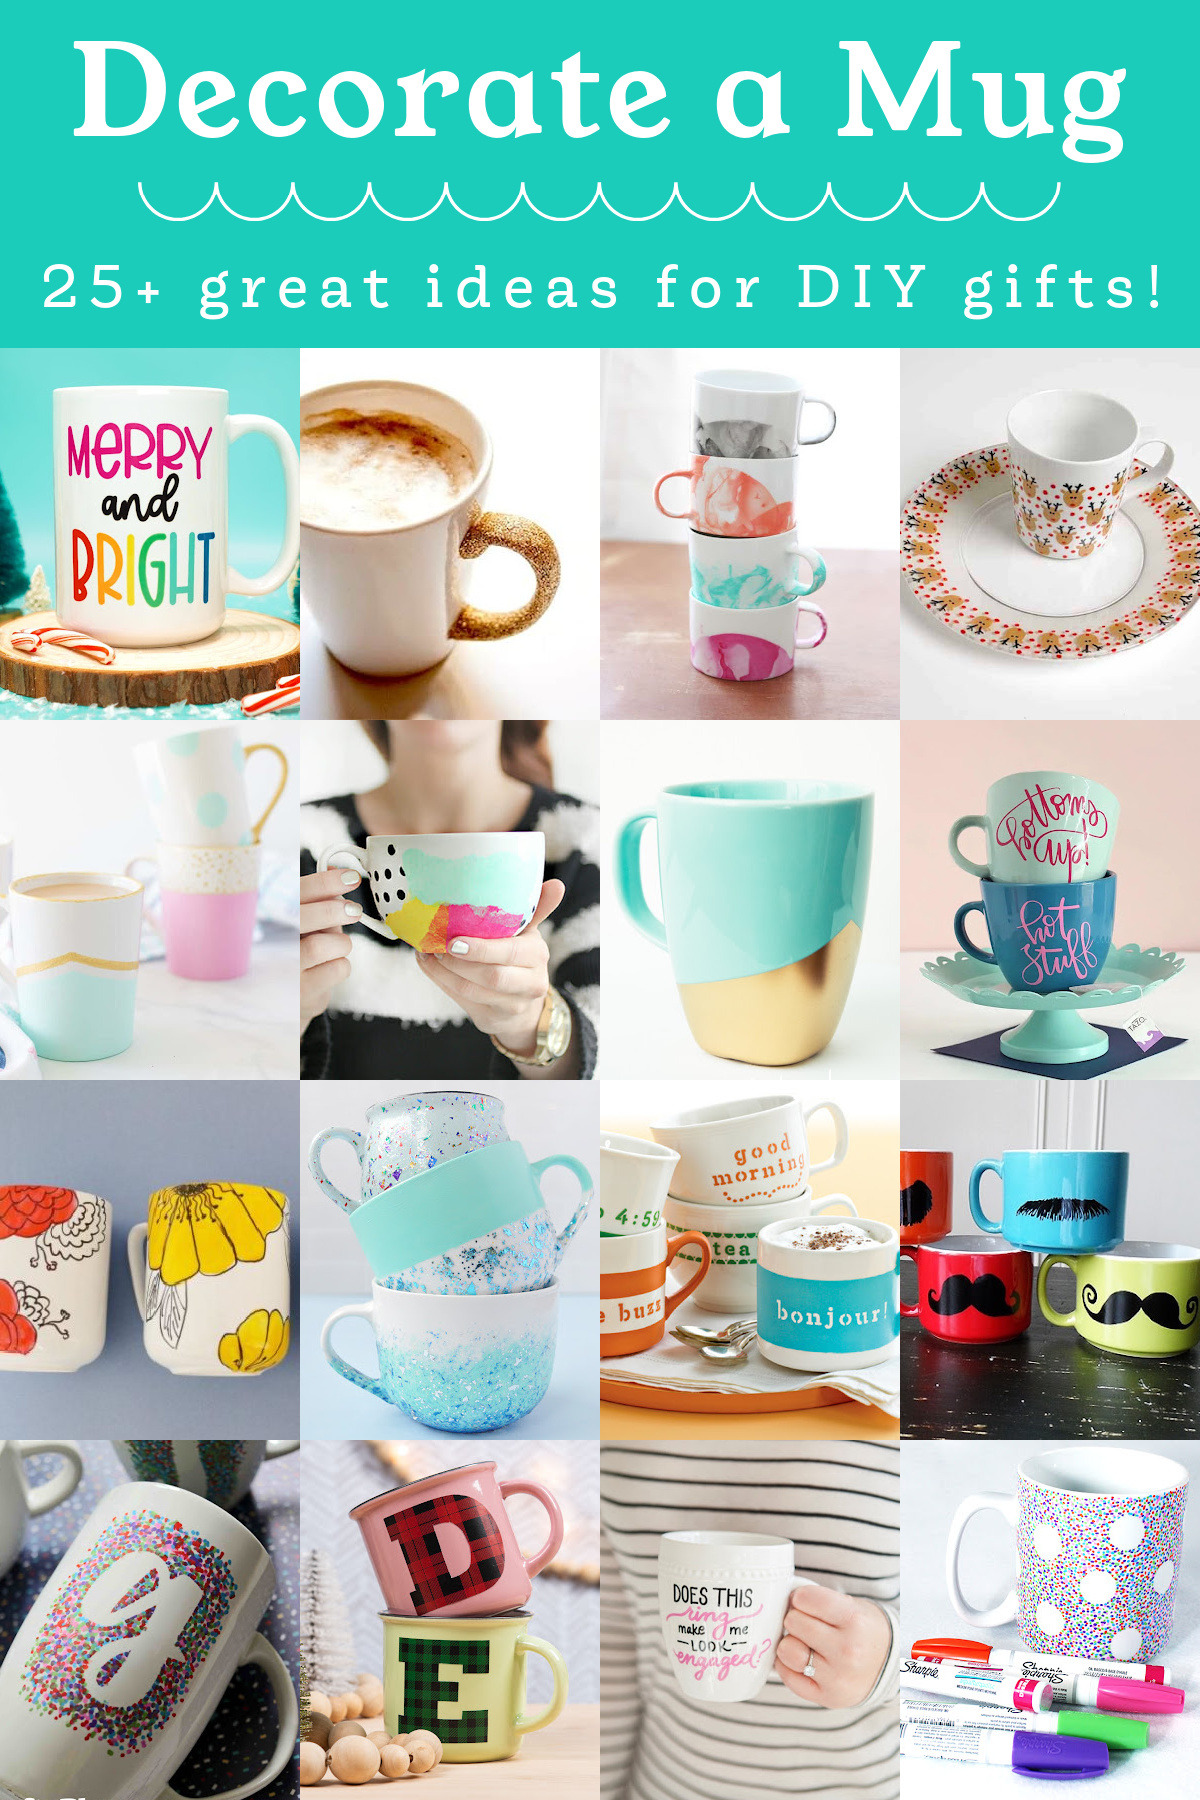 10 Fancy Glass Cups And Mugs ideas